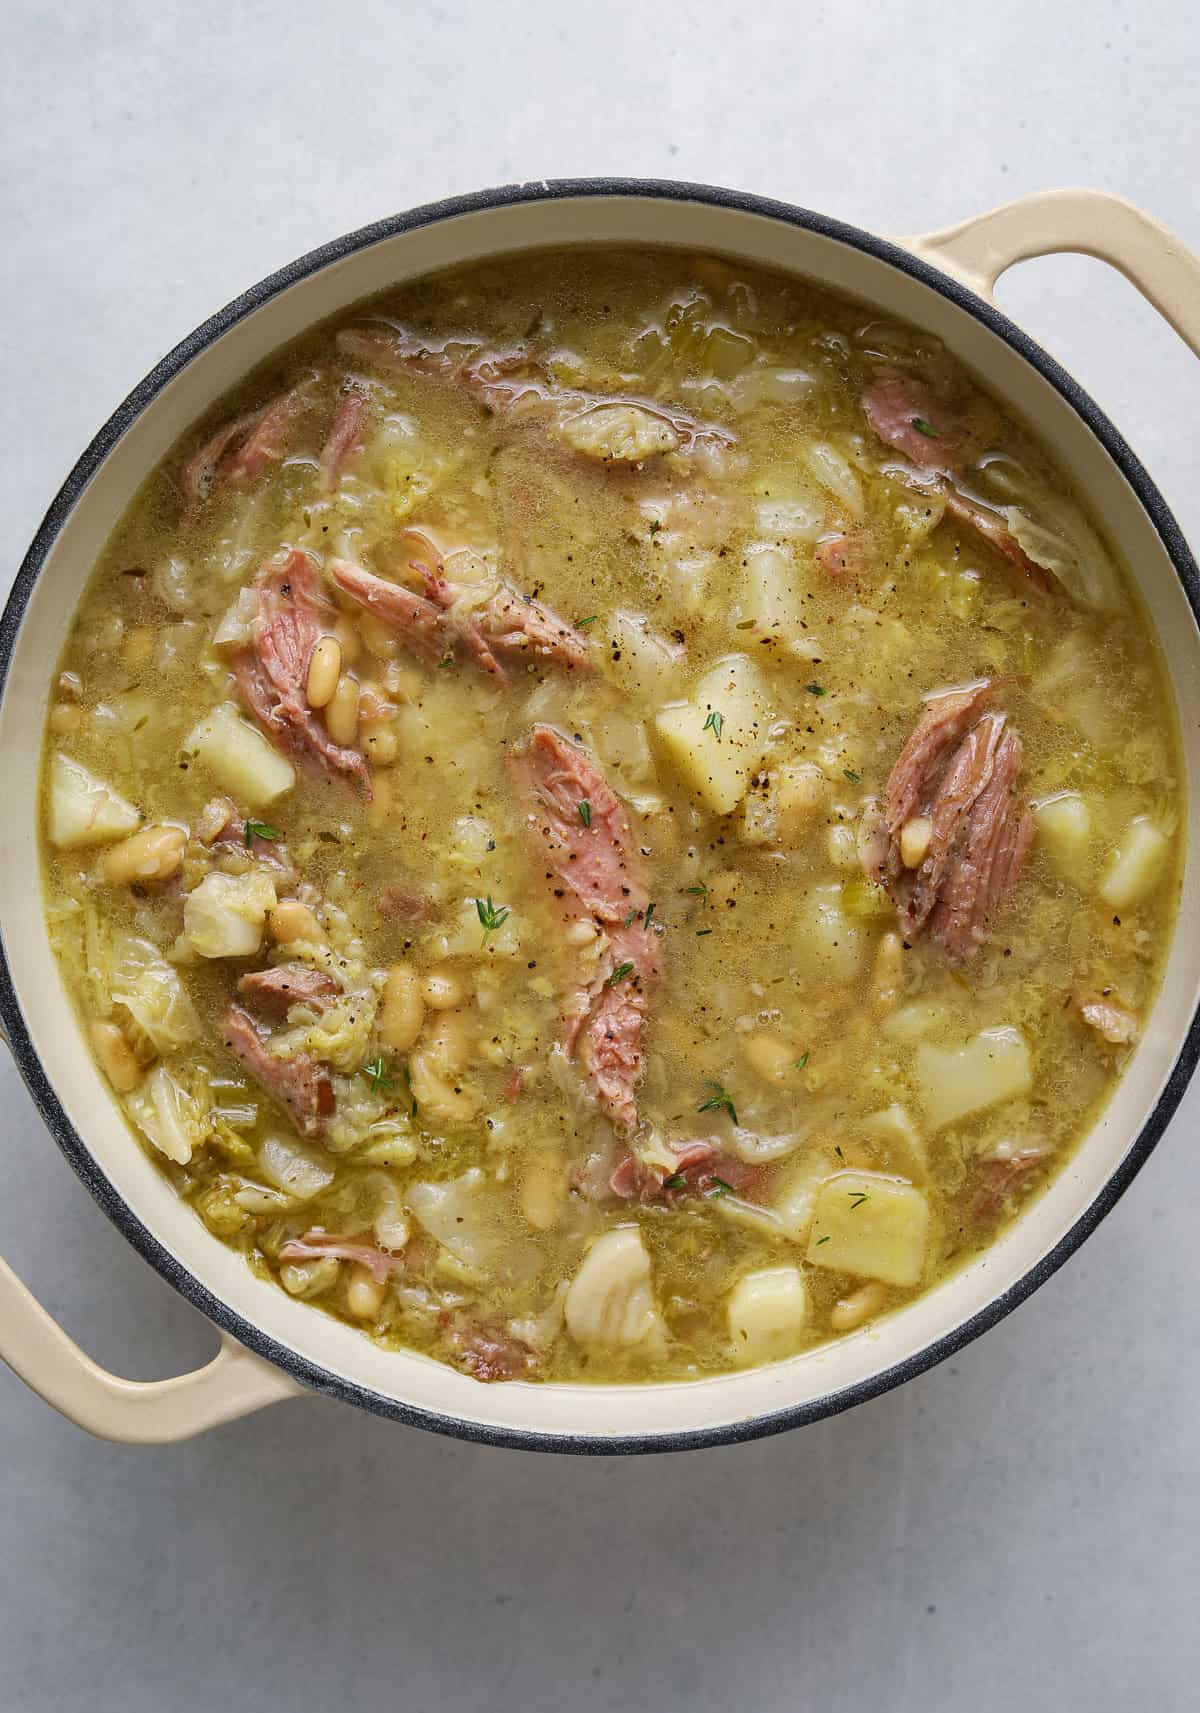 15+ Hearty Winter Soups and Stews to Make Right Now